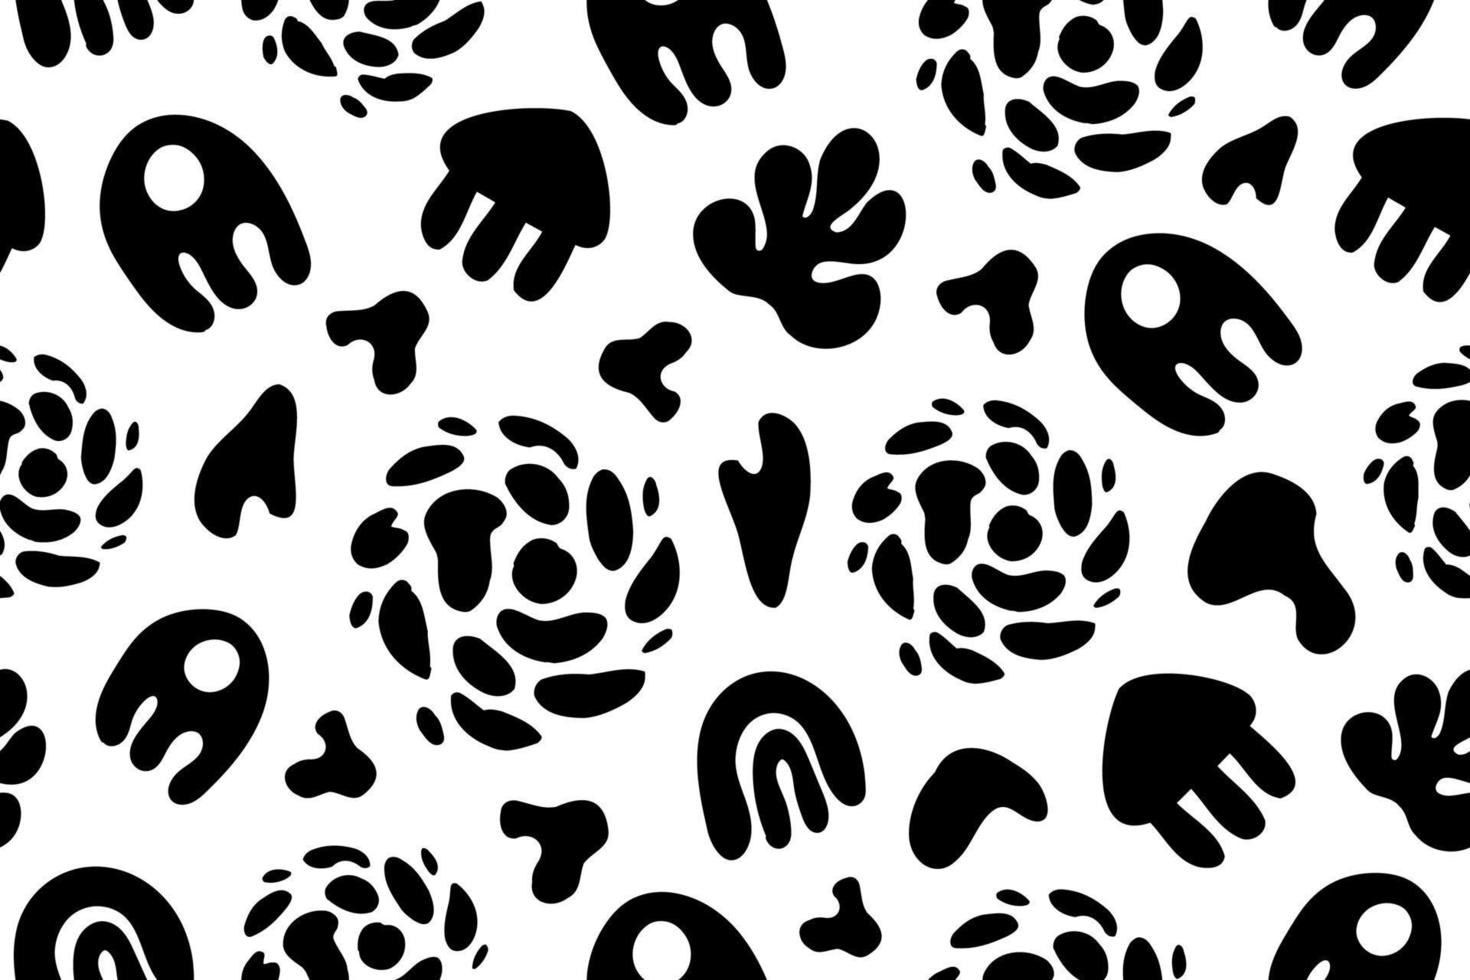 Black and white pattern with abstract shapes. Flat black organic shapes and figures, blobs, splats amoebas, repeating seamless vector pattern.